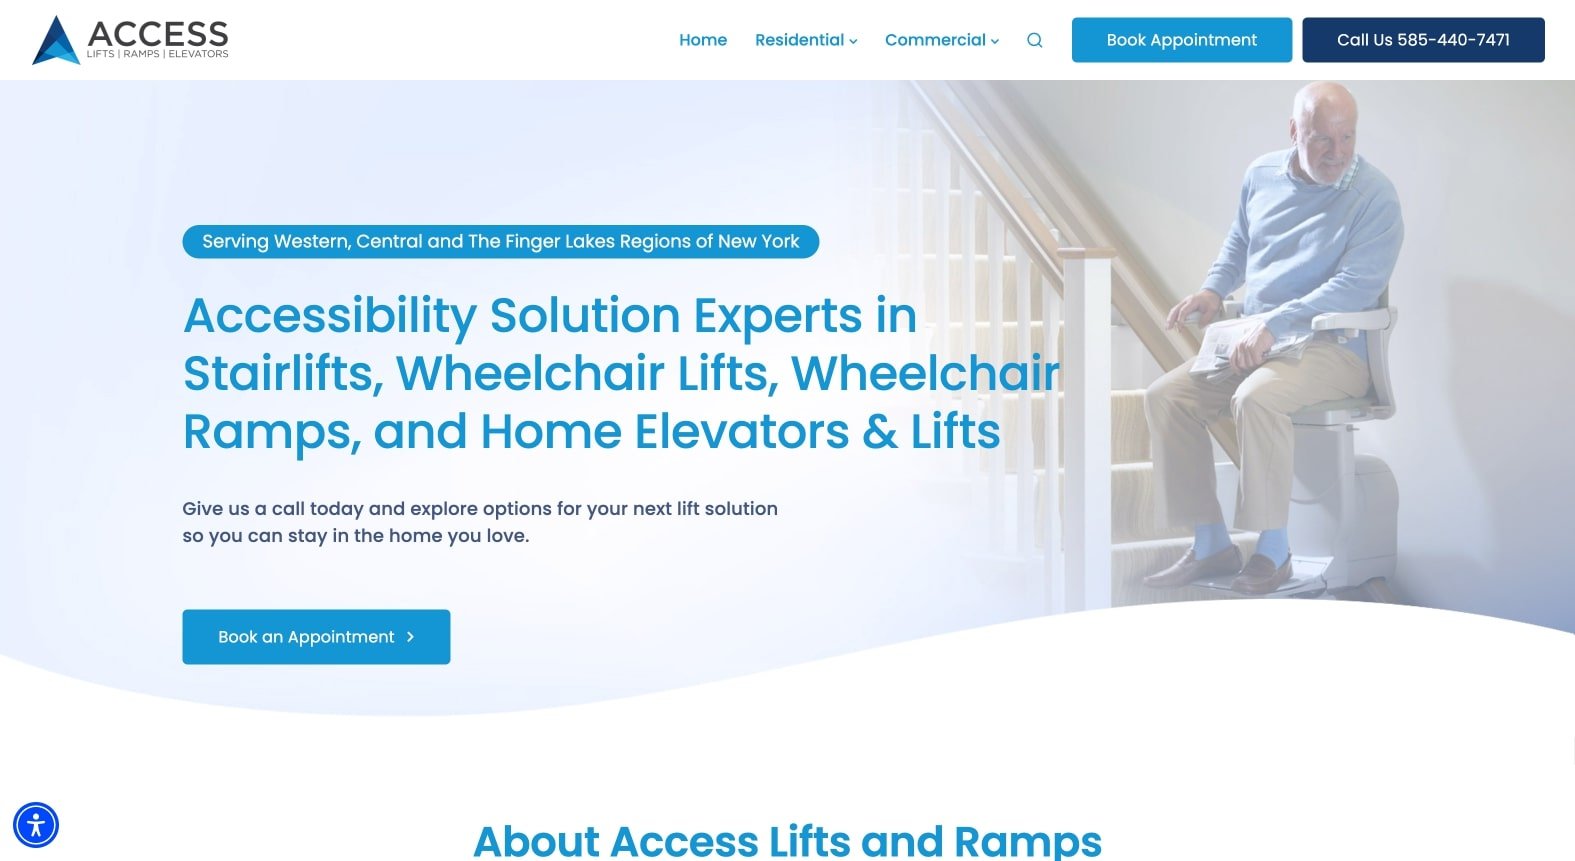 Access Lifts and Ramps